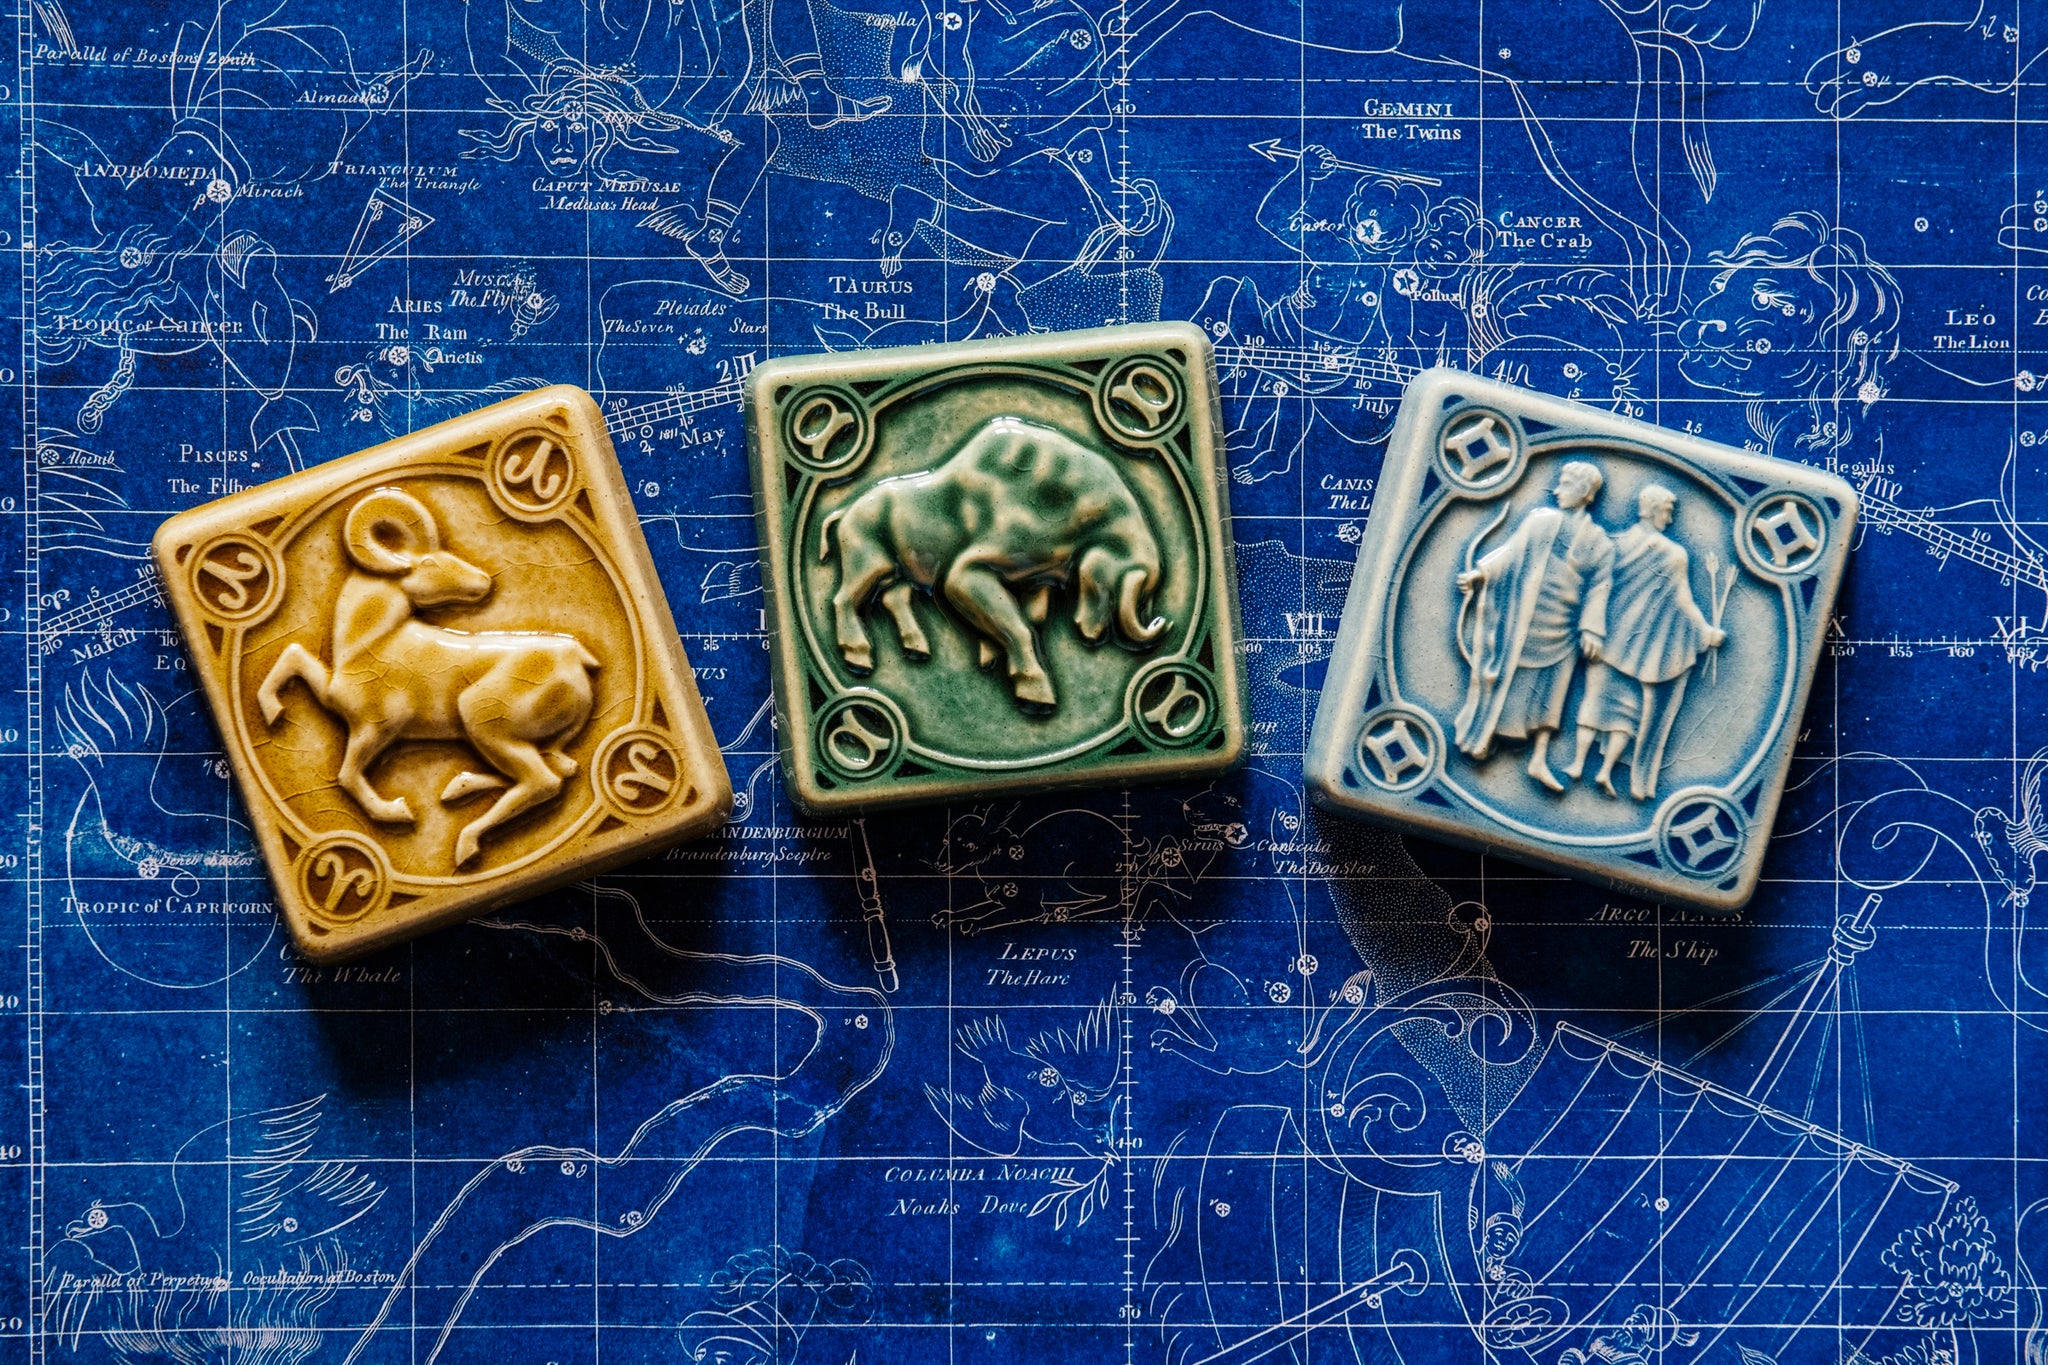 Our hand-sculpted Aries, Taurus, and Gemini tiles are placed in an arch on a deep, blue, historic star map. The Taurus tile features a sturdy bull with its head bowed and horns lowered. The Aries tile has an alert ram with its legs positioned as if it is prancing. The ram's head is turned backwards over its shoulder. Gemini is depicted by two men, “the twins” in flowing robes. One is holding a bow, the other is holding two arrows.